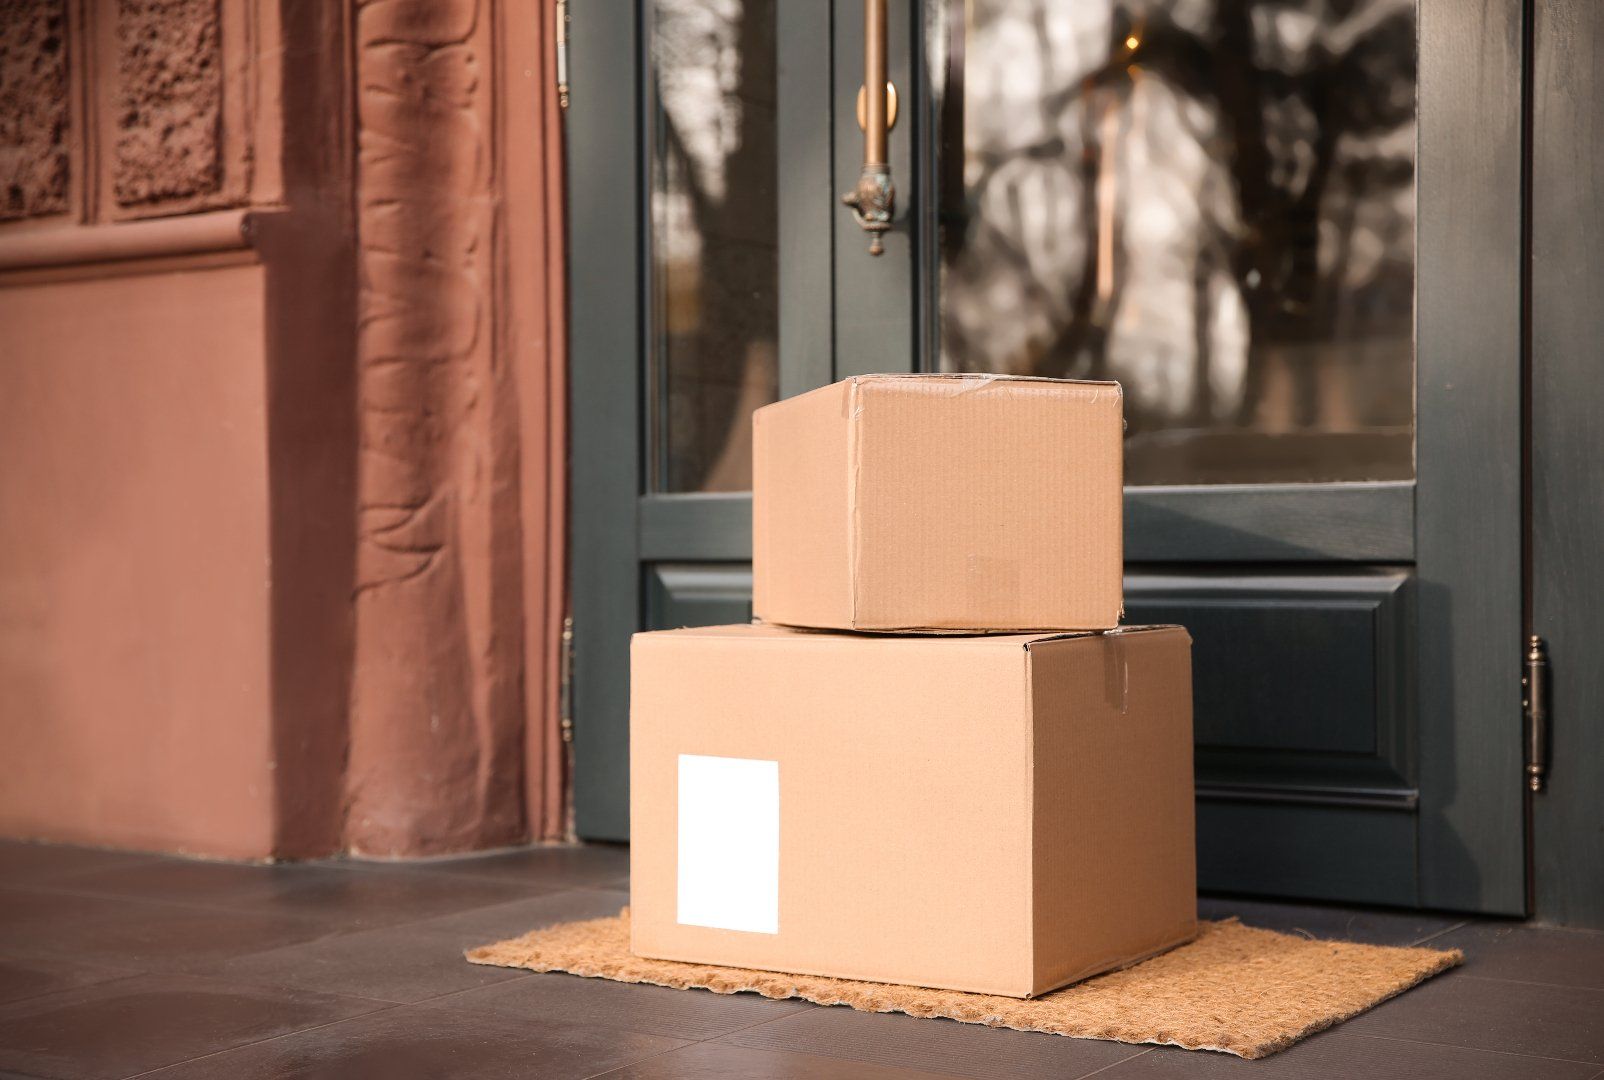 Boxes on porch from ecommerce sales